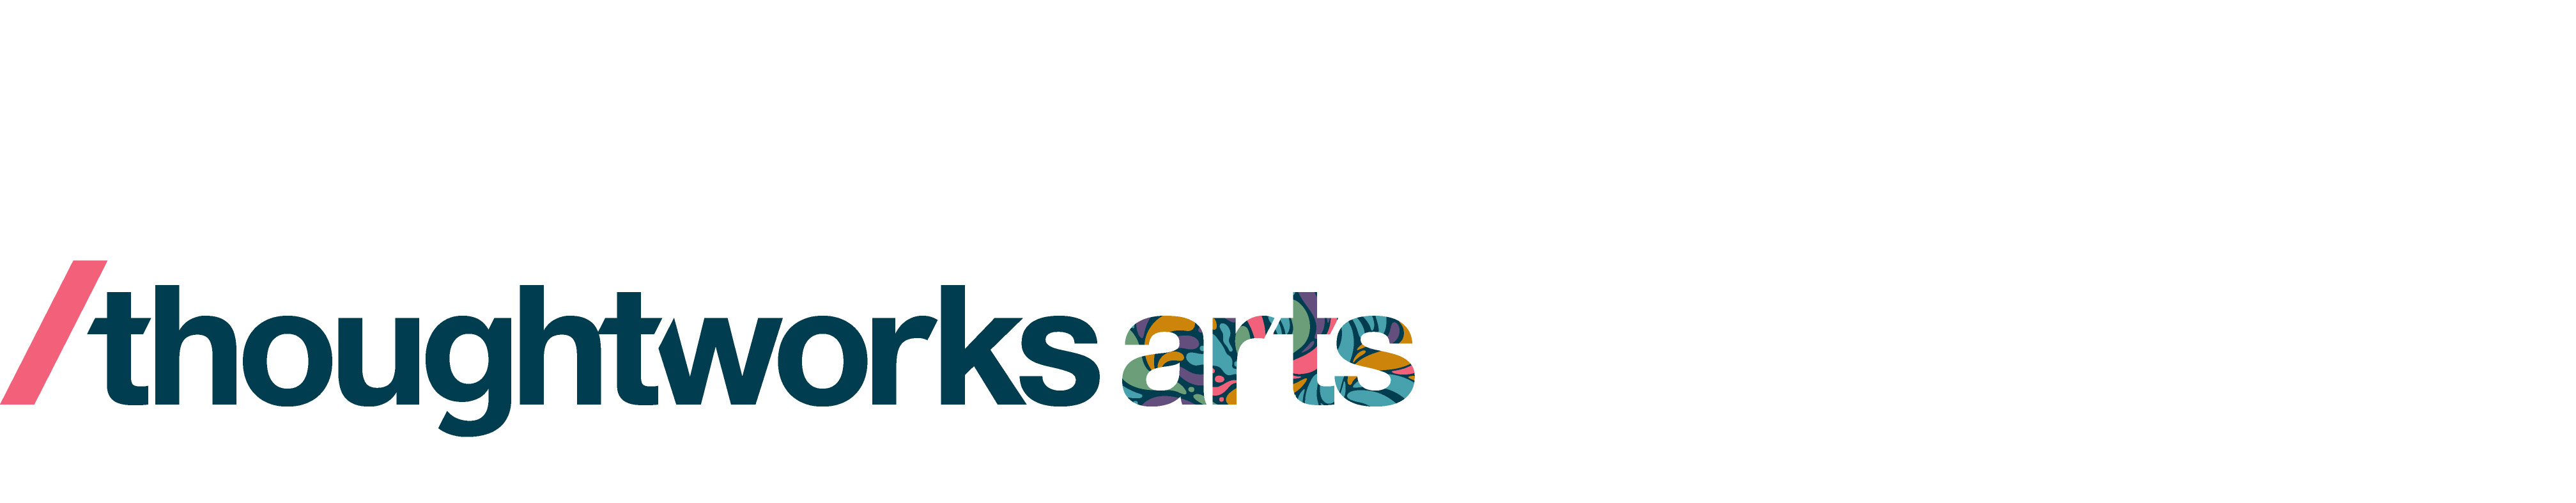 Thoughtworks Arts logo